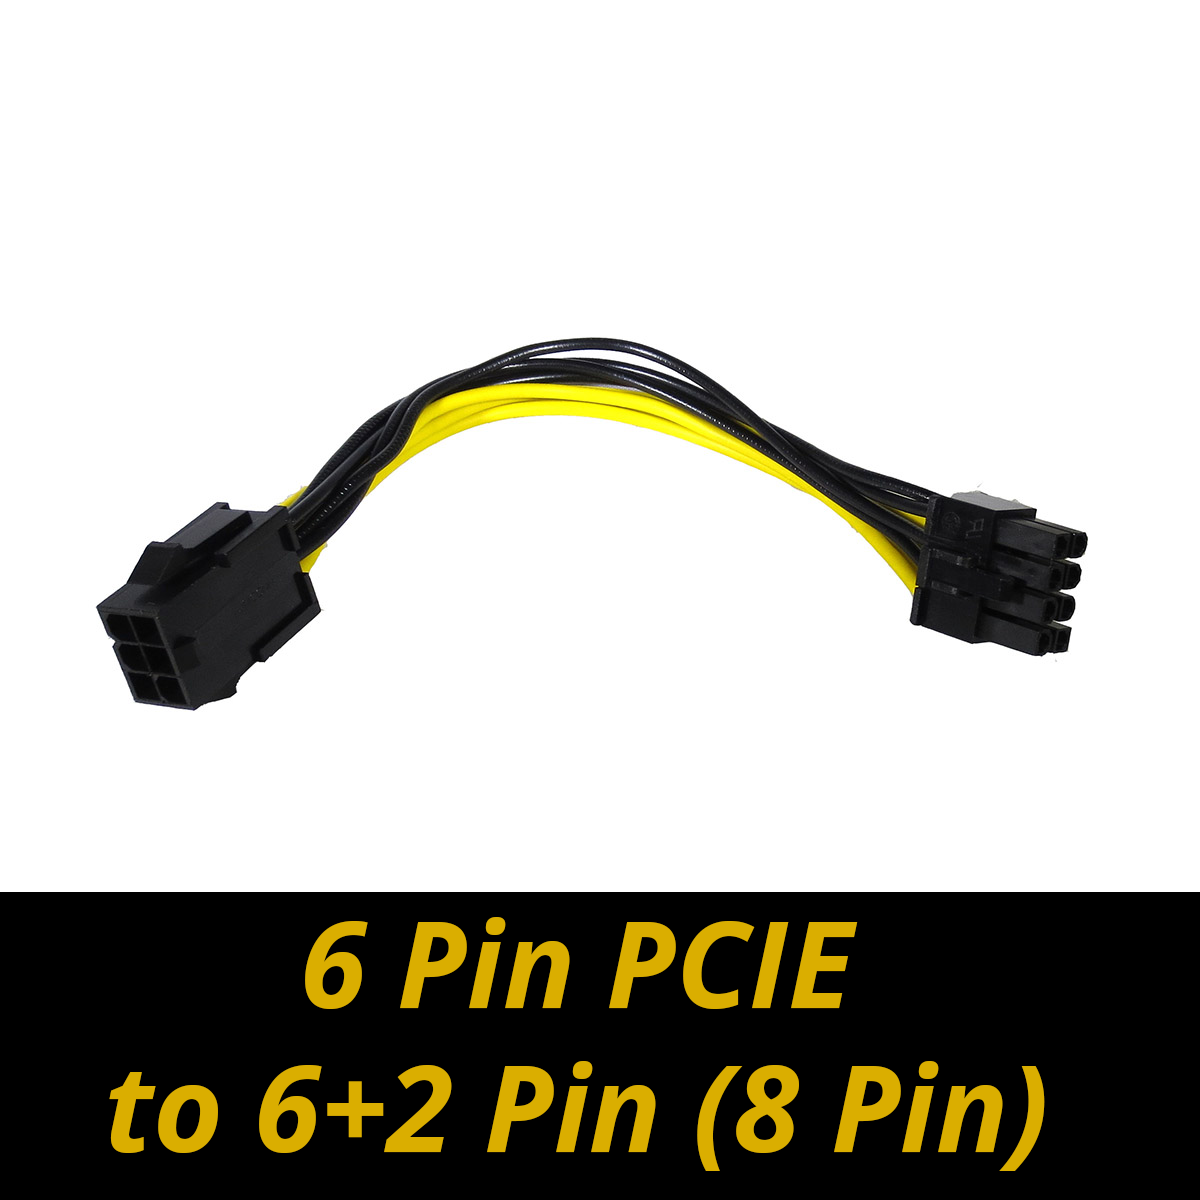 6 pin PCIe to 8 pin PCIe Adapter Cable (6+2 pin) – Miner Parts